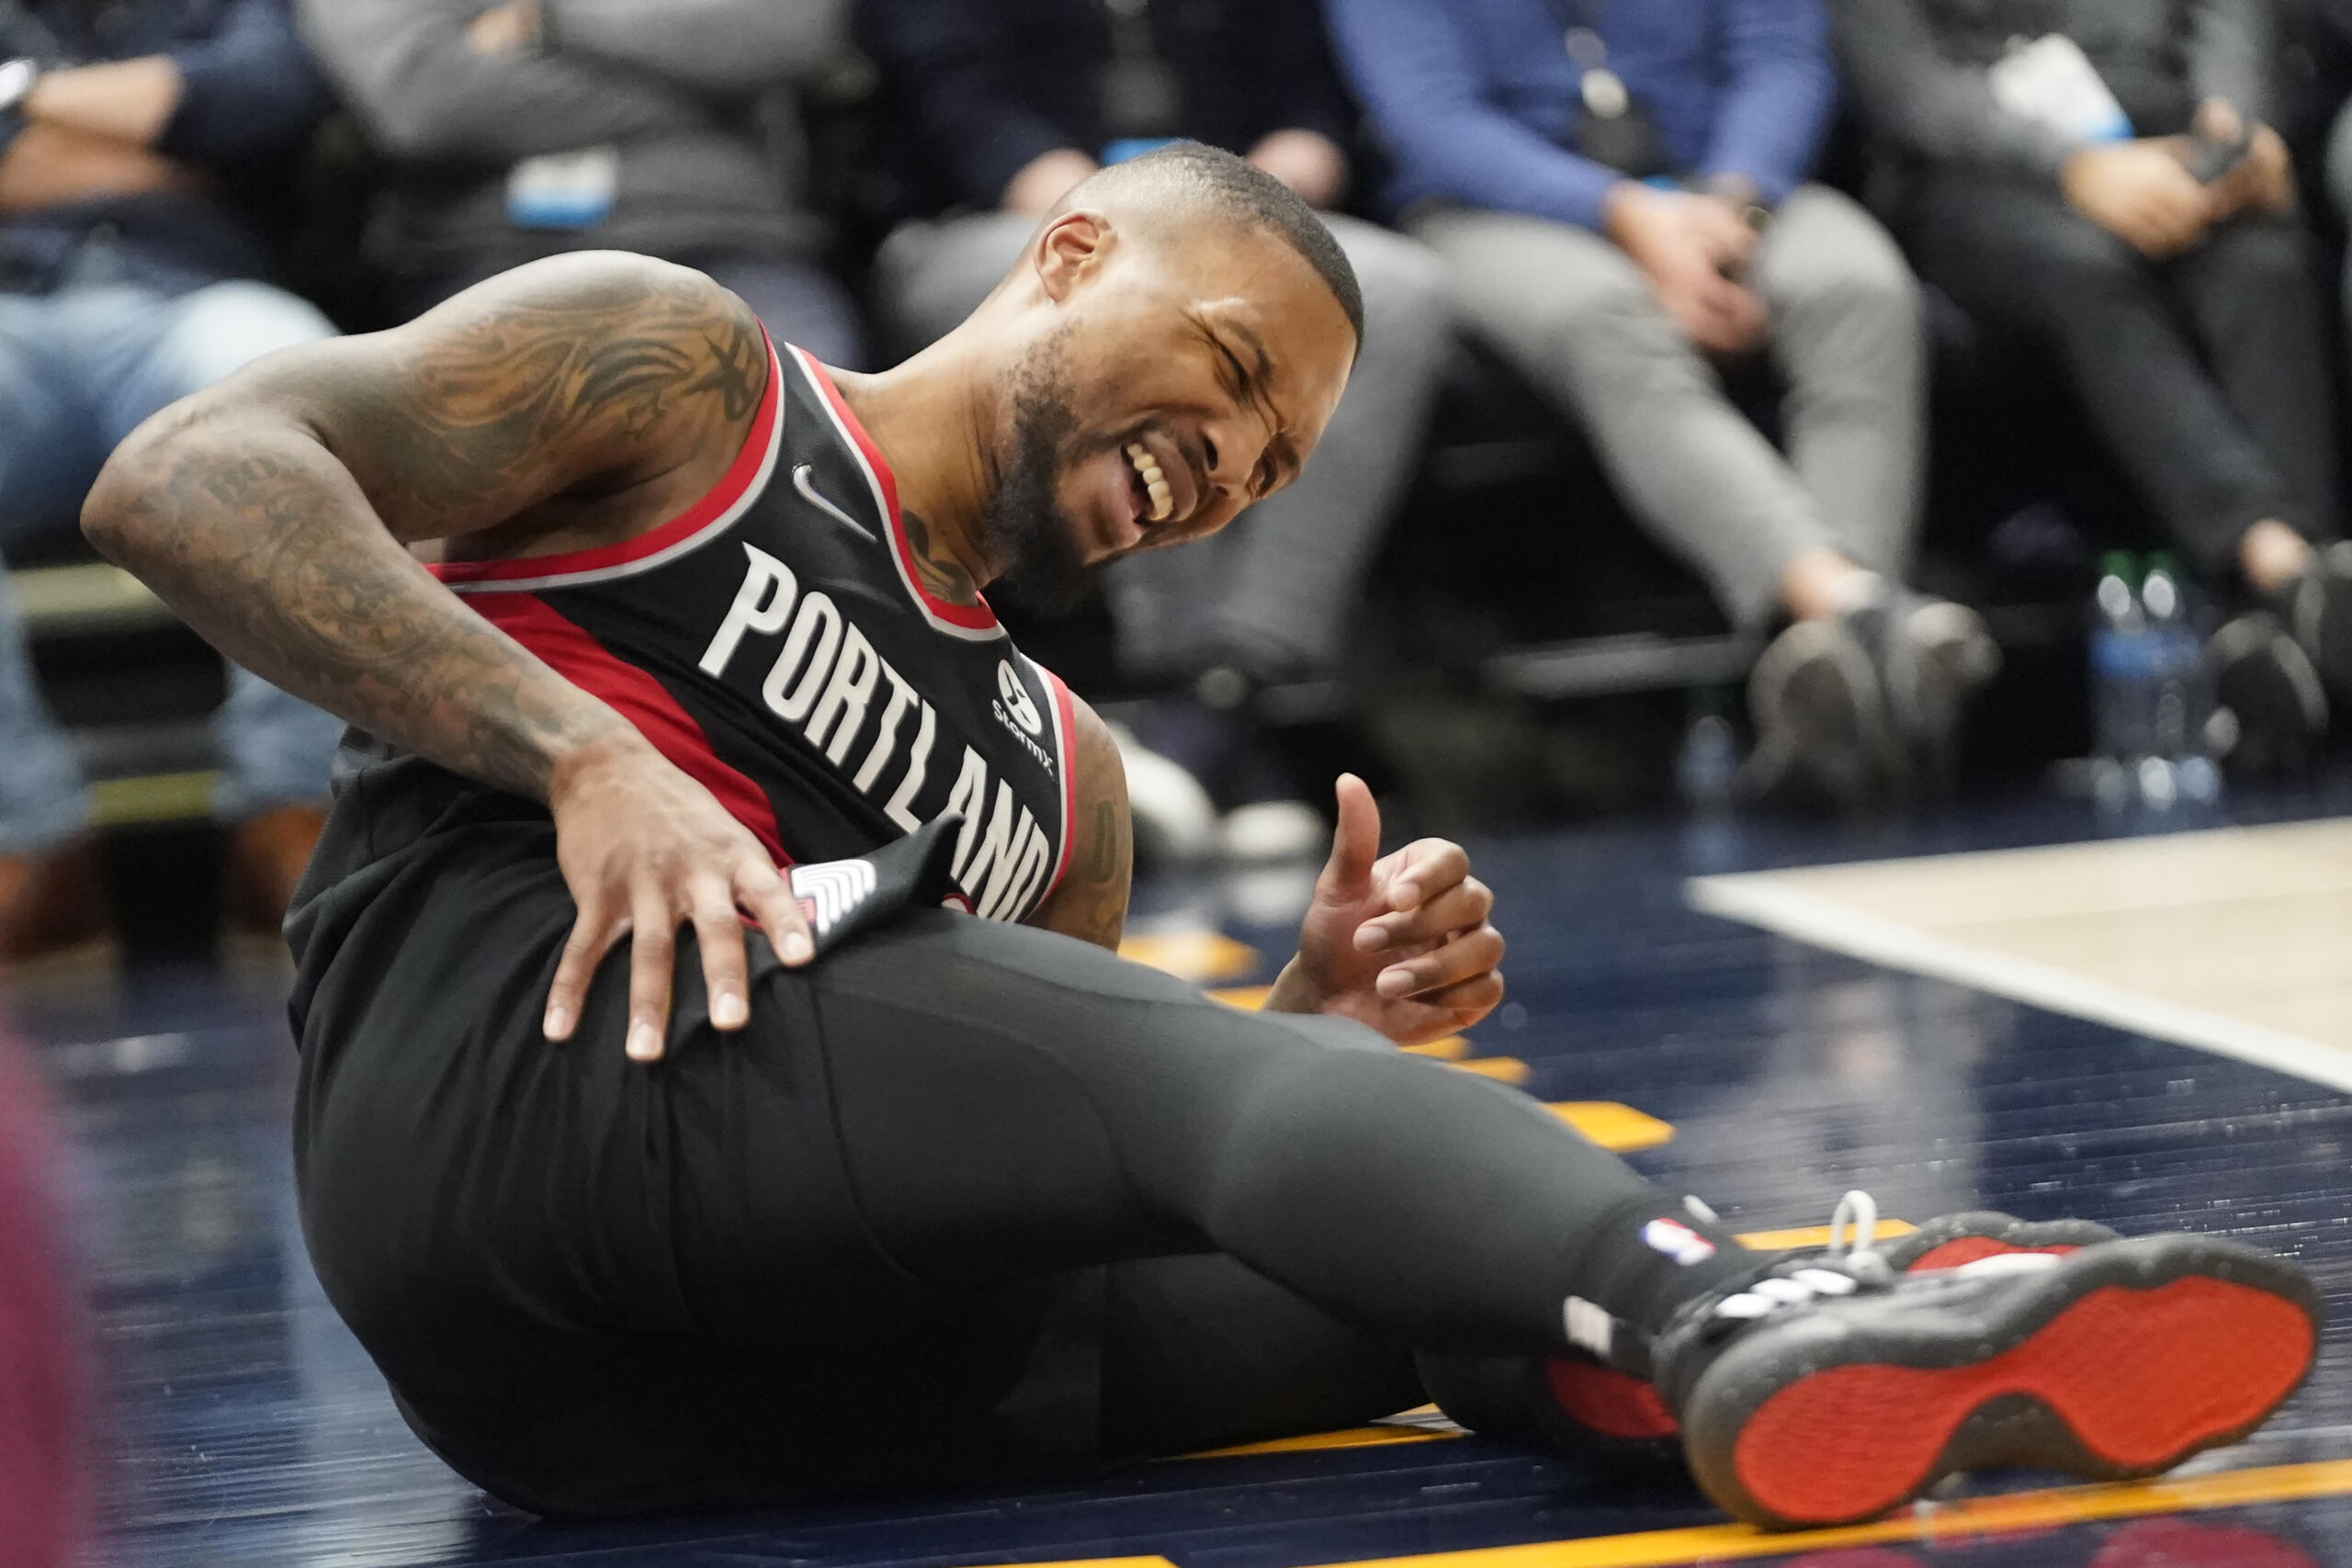 Portland Trail Blazers guard Damian Lillard reacts after being fouled in the first half during an NBA basketball game against the Utah Jazz, Monday, Nov. 29, 2021, in Salt Lake City.